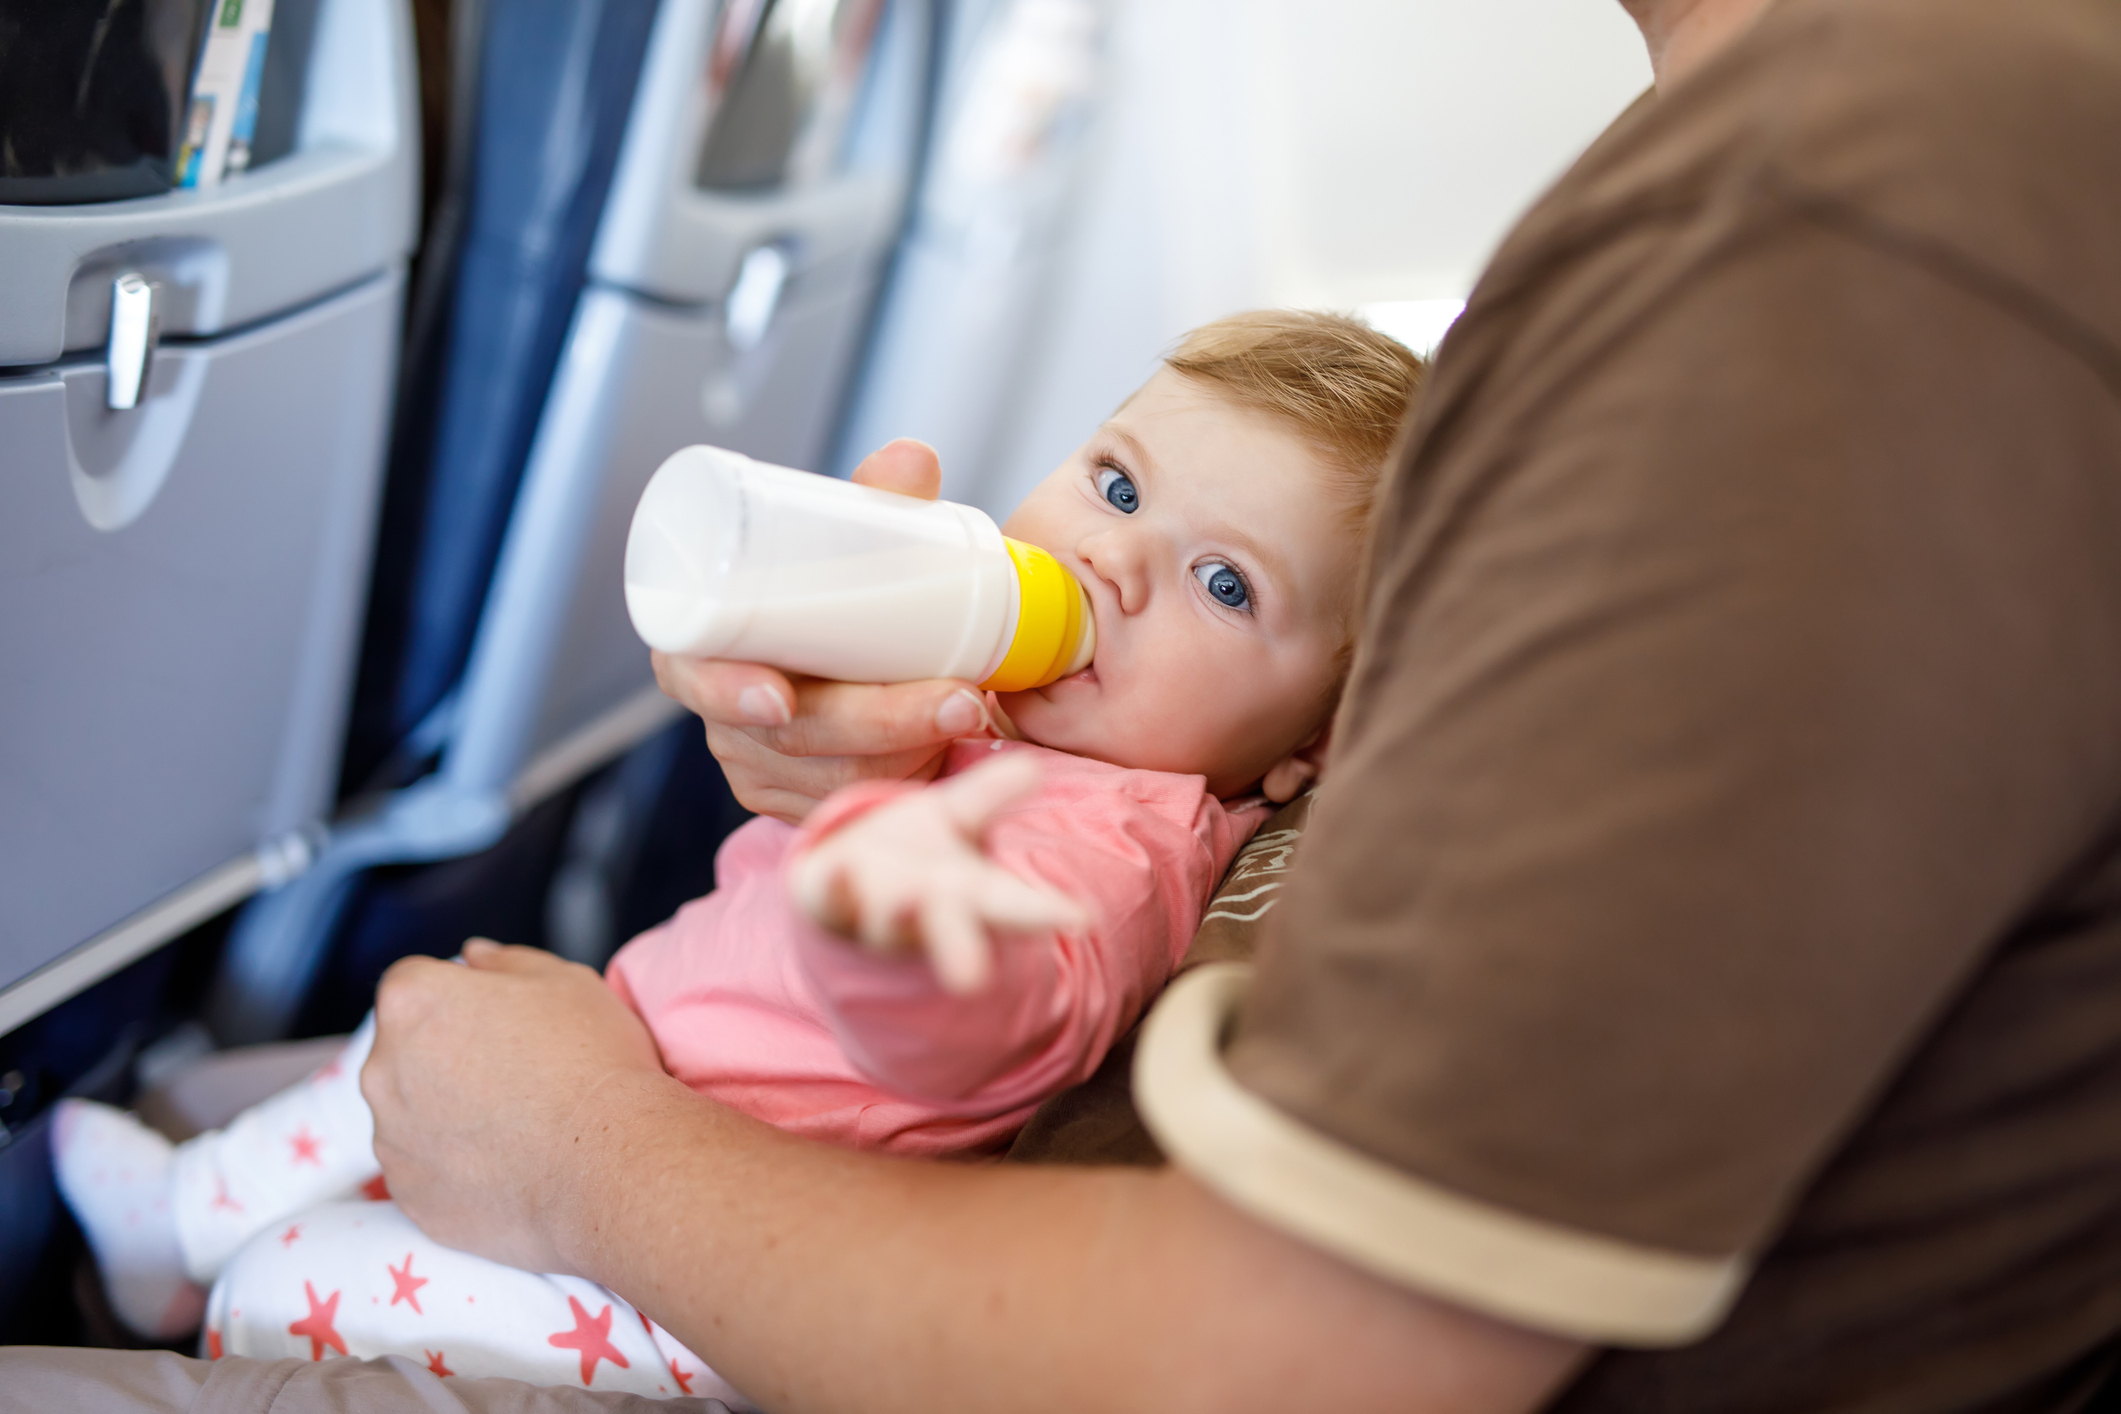 Tips for Traveling While Breast Pumping